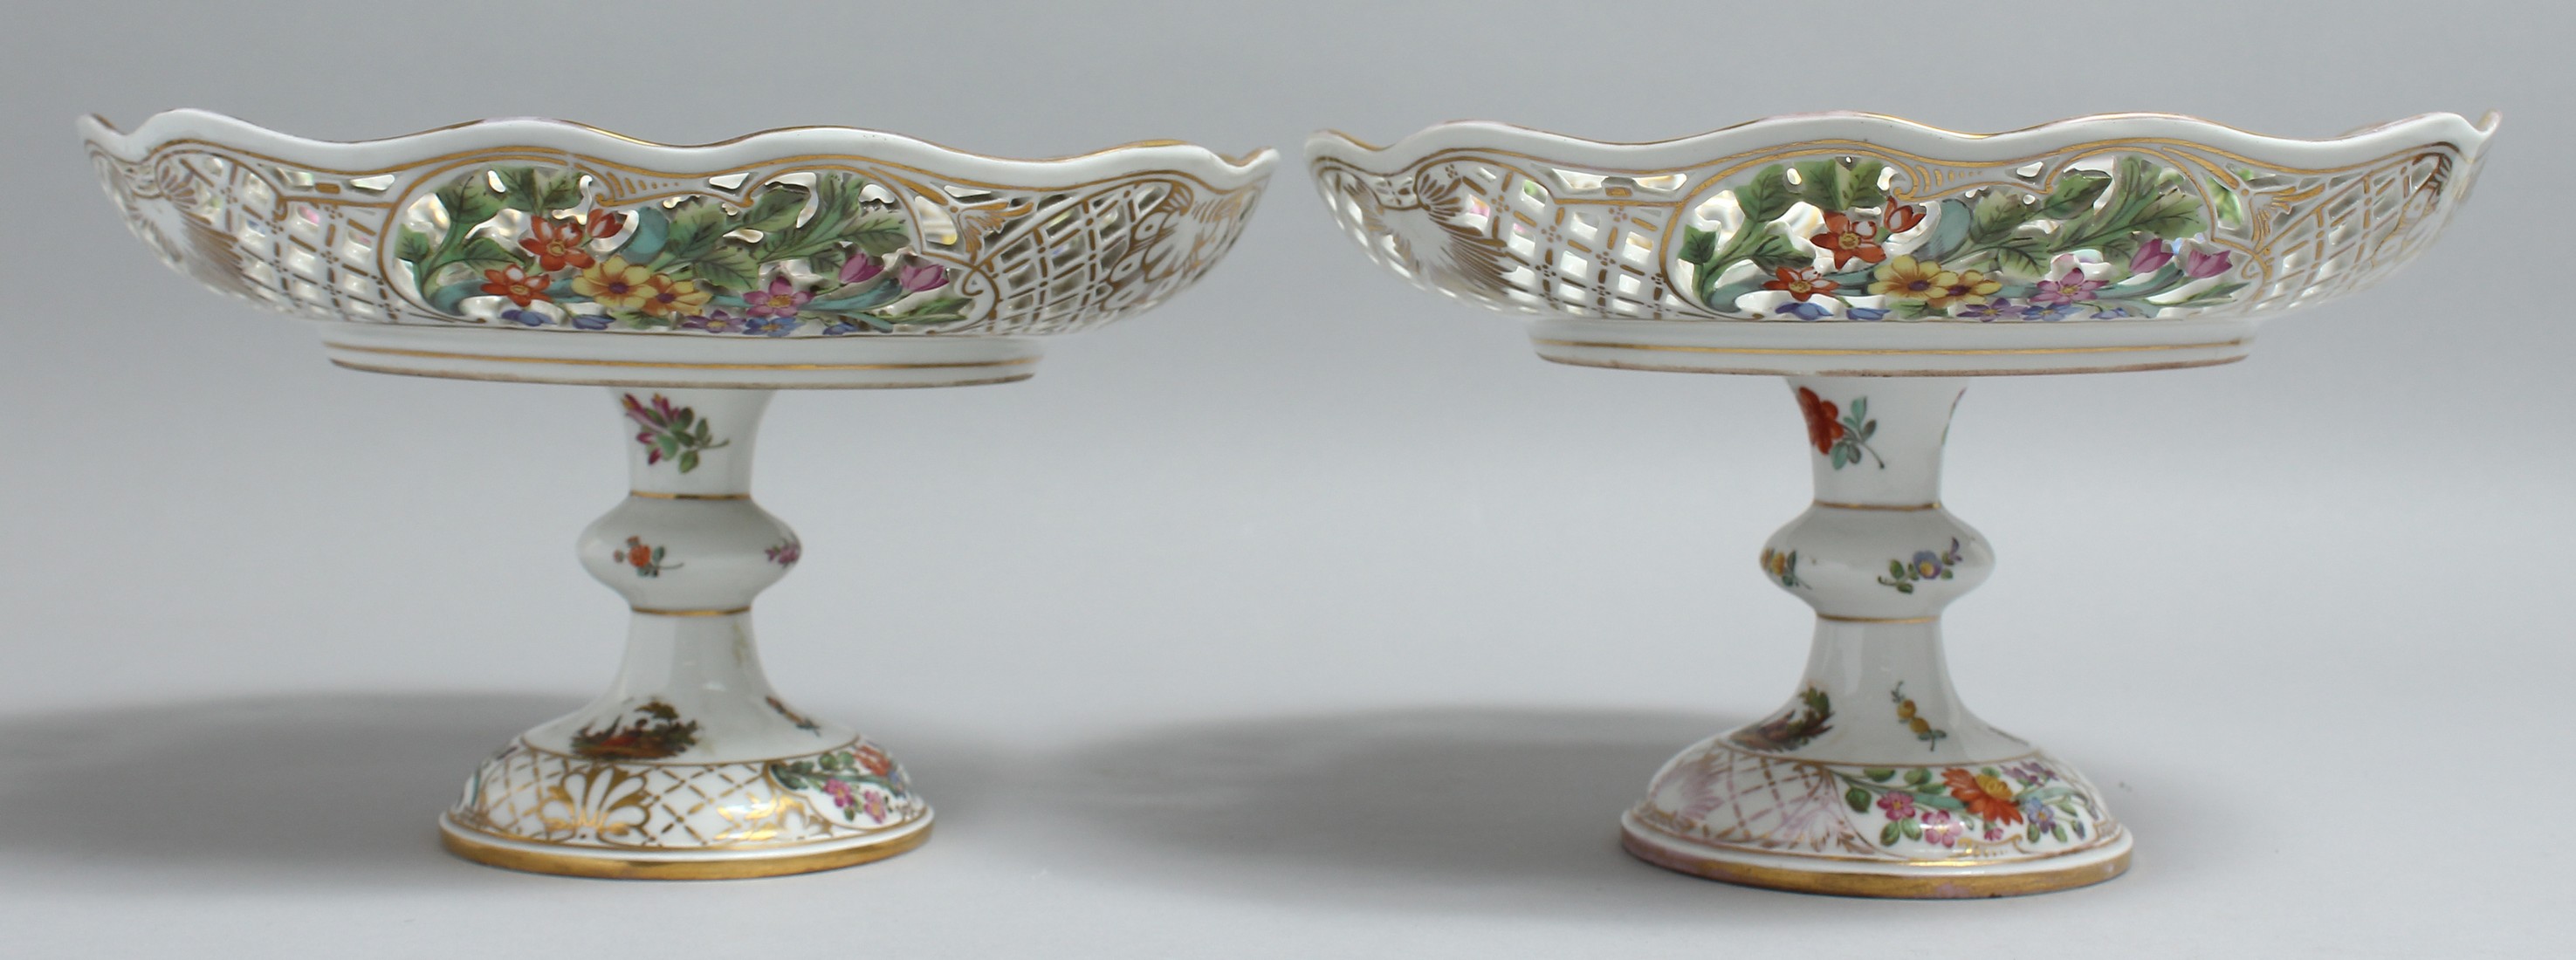 A VERY GOOD PAIR OF 19TH CENTURY DRESDEN PIERCED COMPORTS painted with flowers and figures mark in - Bild 4 aus 16